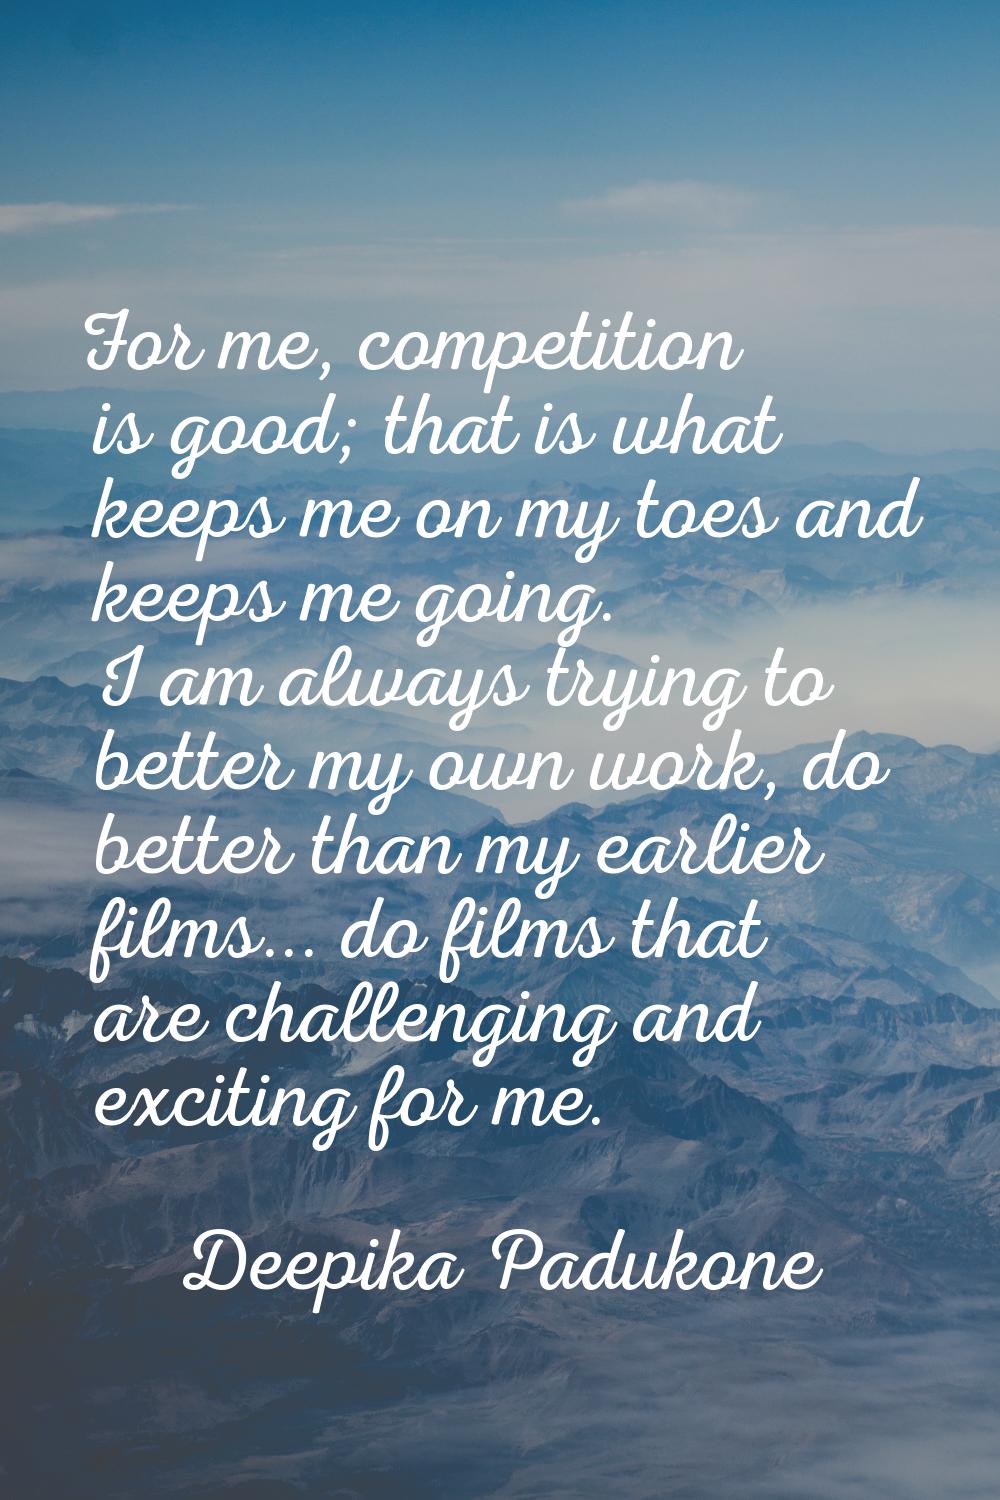 For me, competition is good; that is what keeps me on my toes and keeps me going. I am always tryin